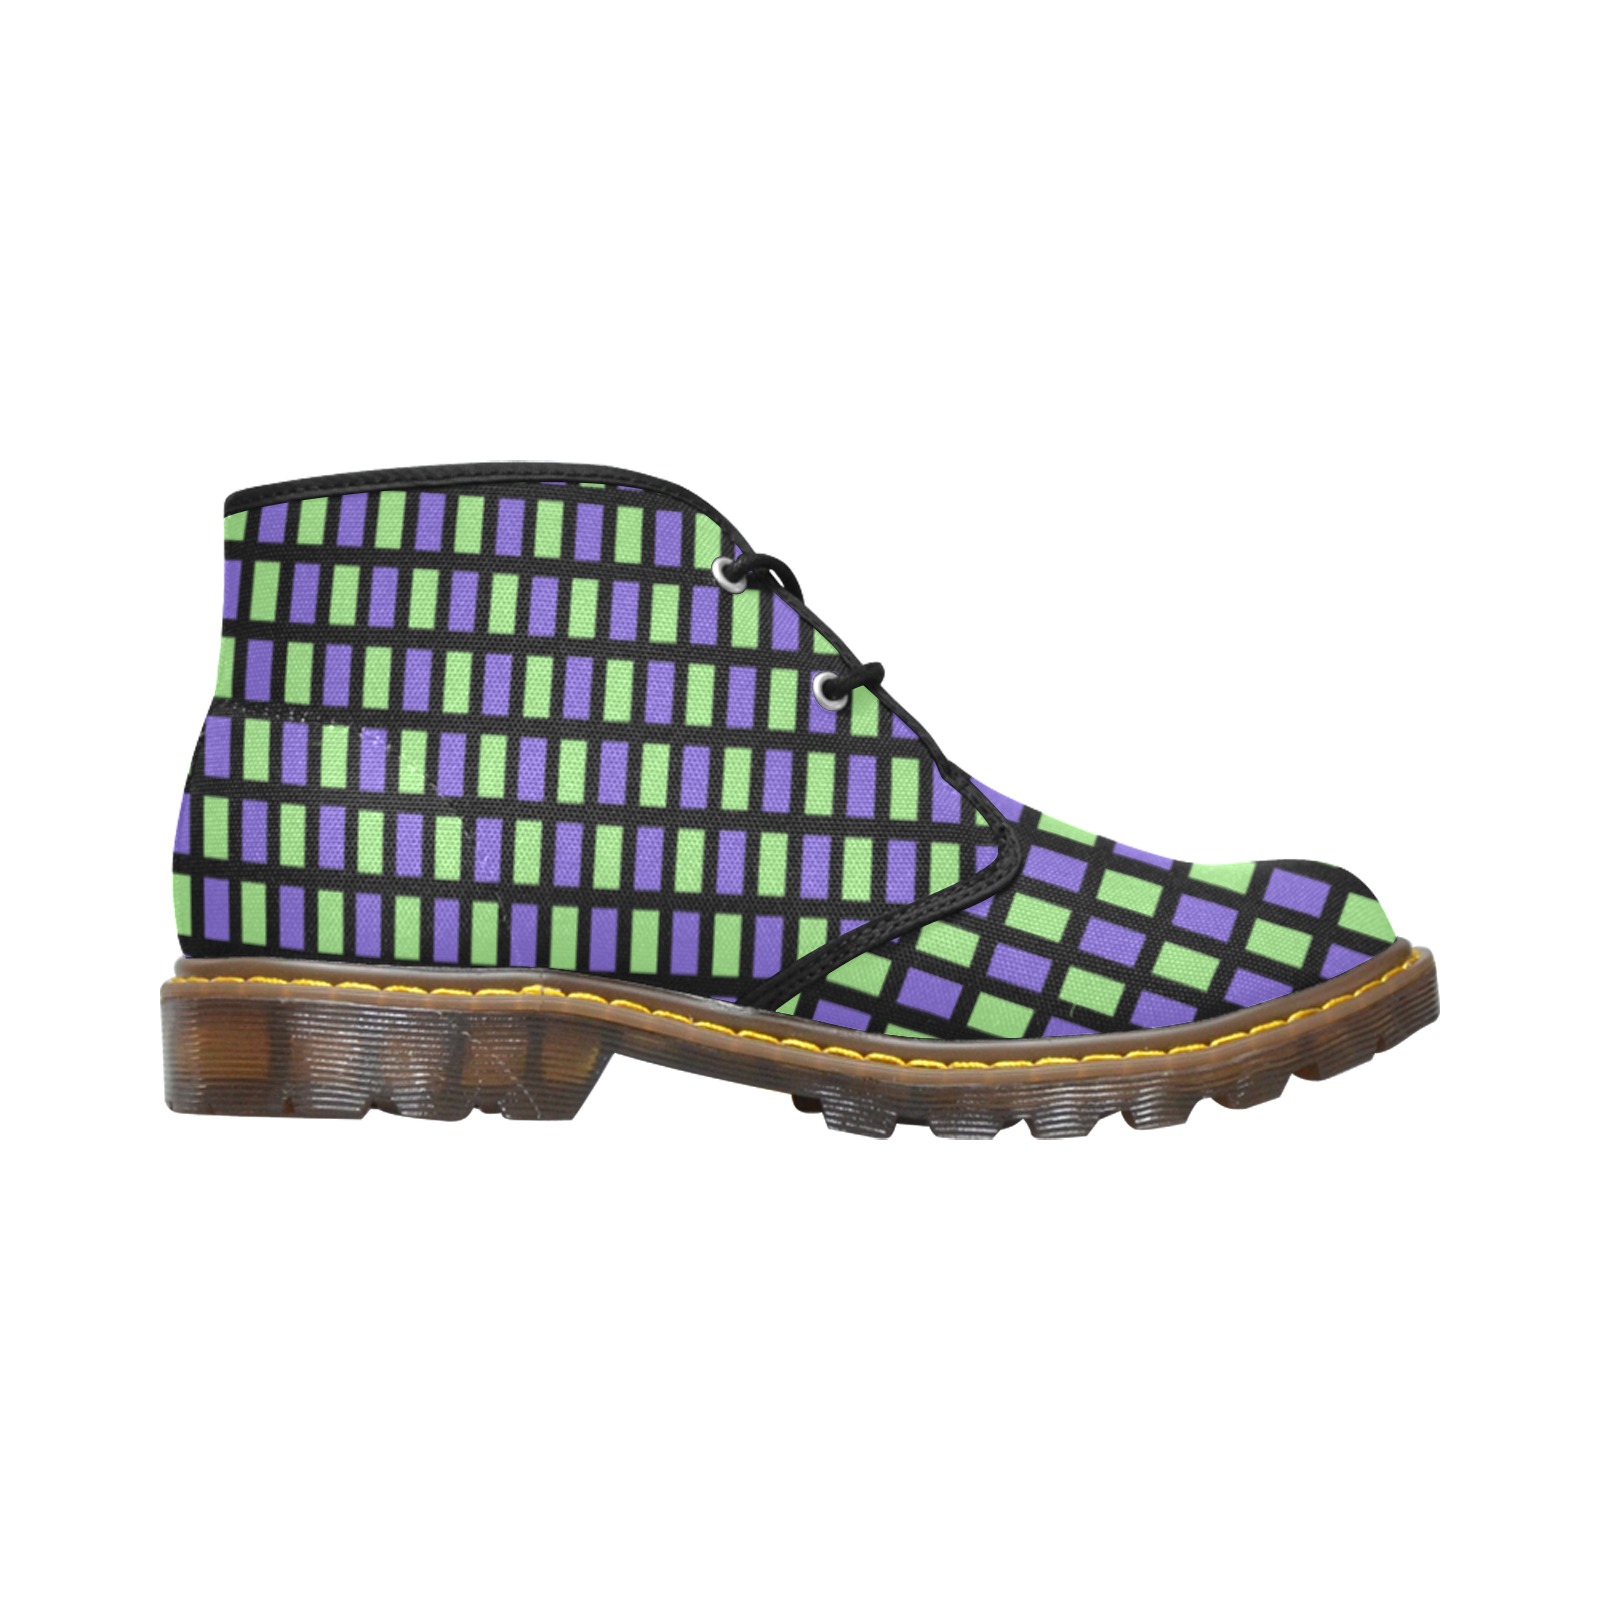 blue and green Men's Canvas Chukka Boots (Model 2402-1)